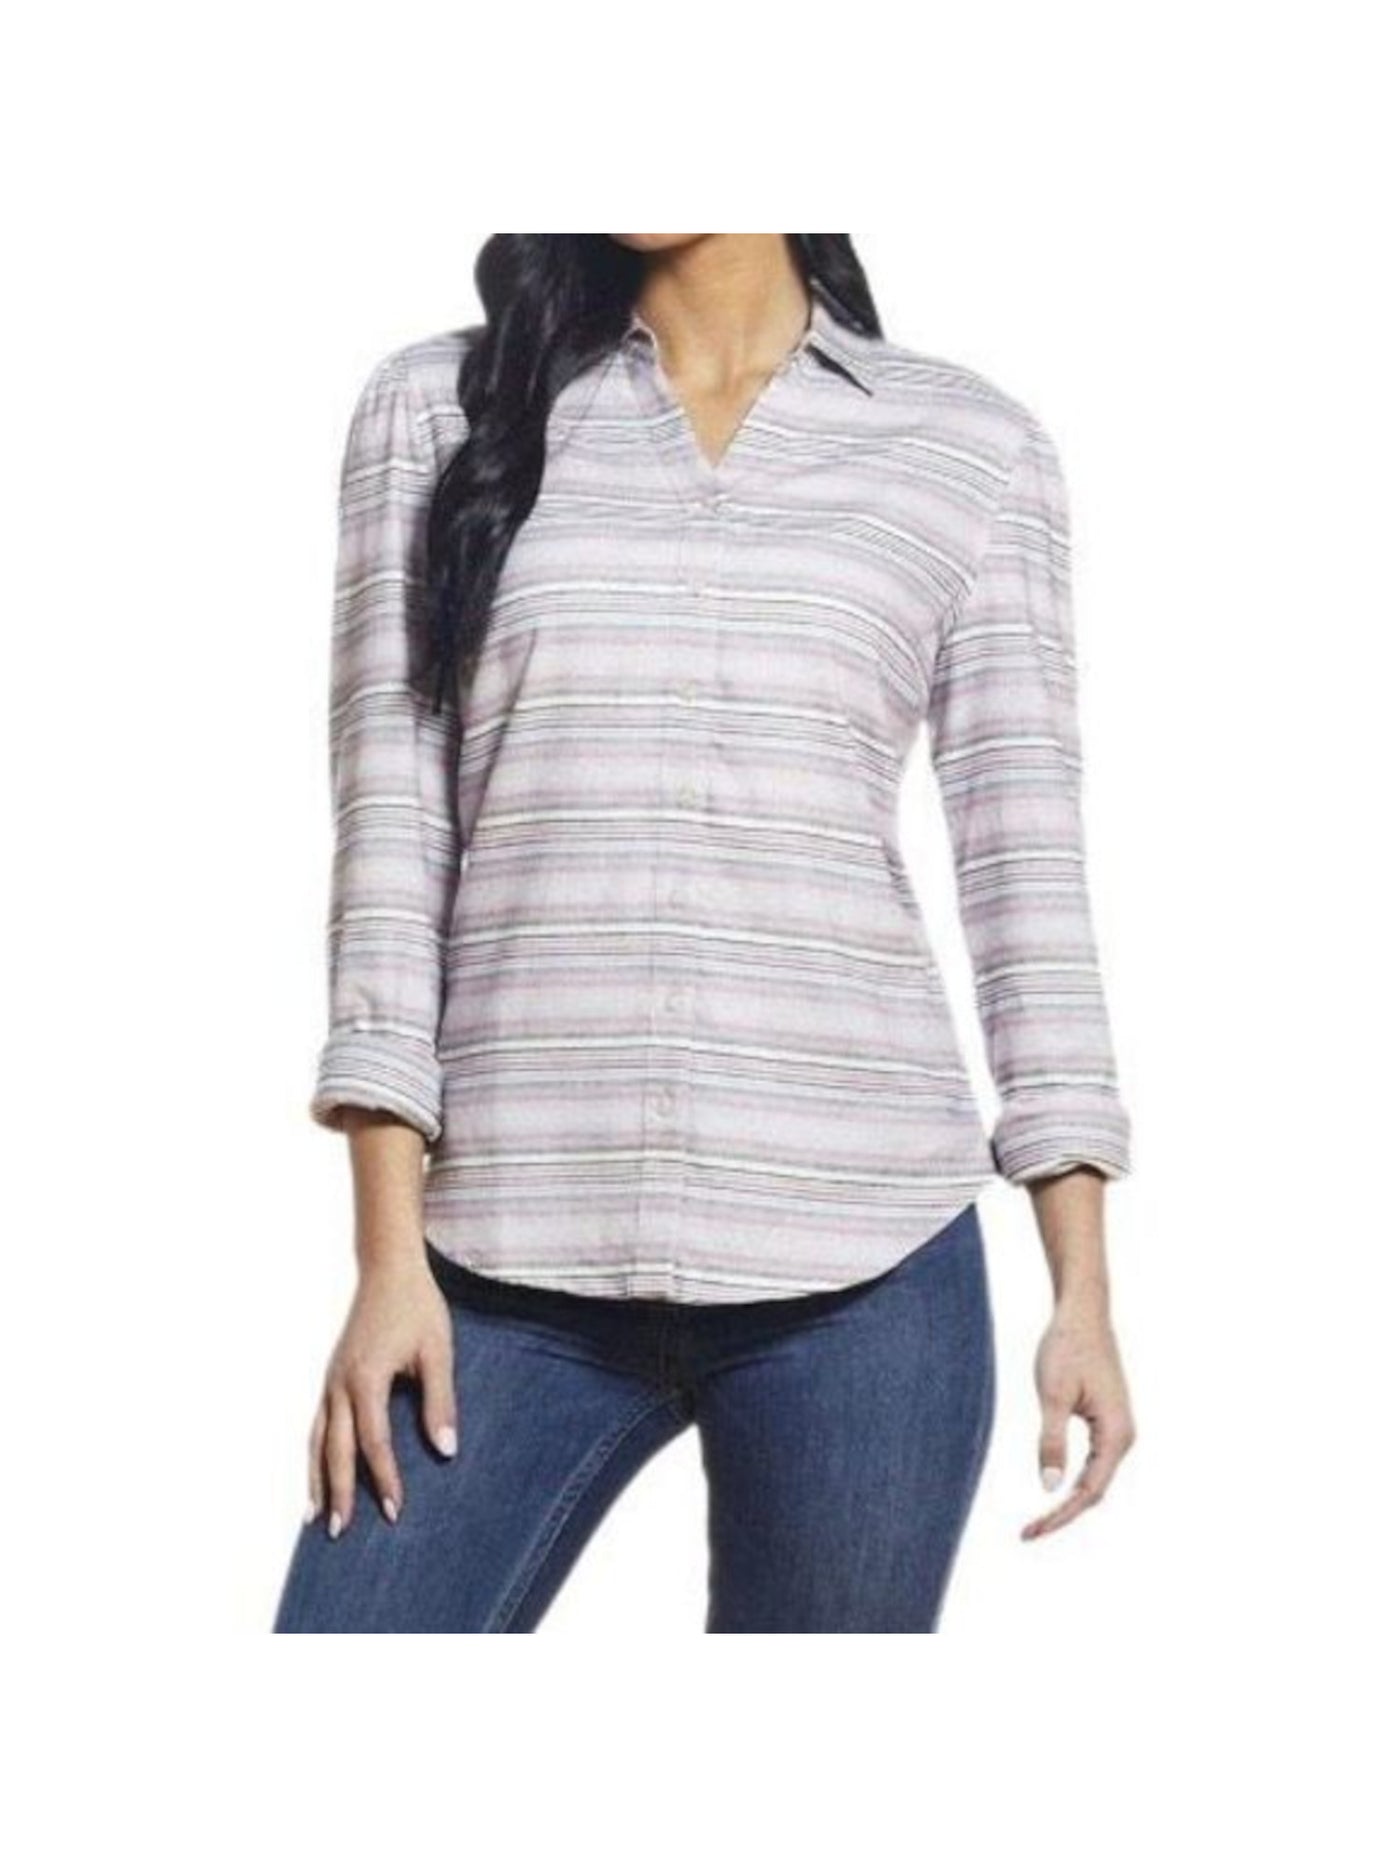 WEATHERPROOF VINTAGE Womens Gray Stretch Striped Cuffed Sleeve V Neck Button Up Top XS